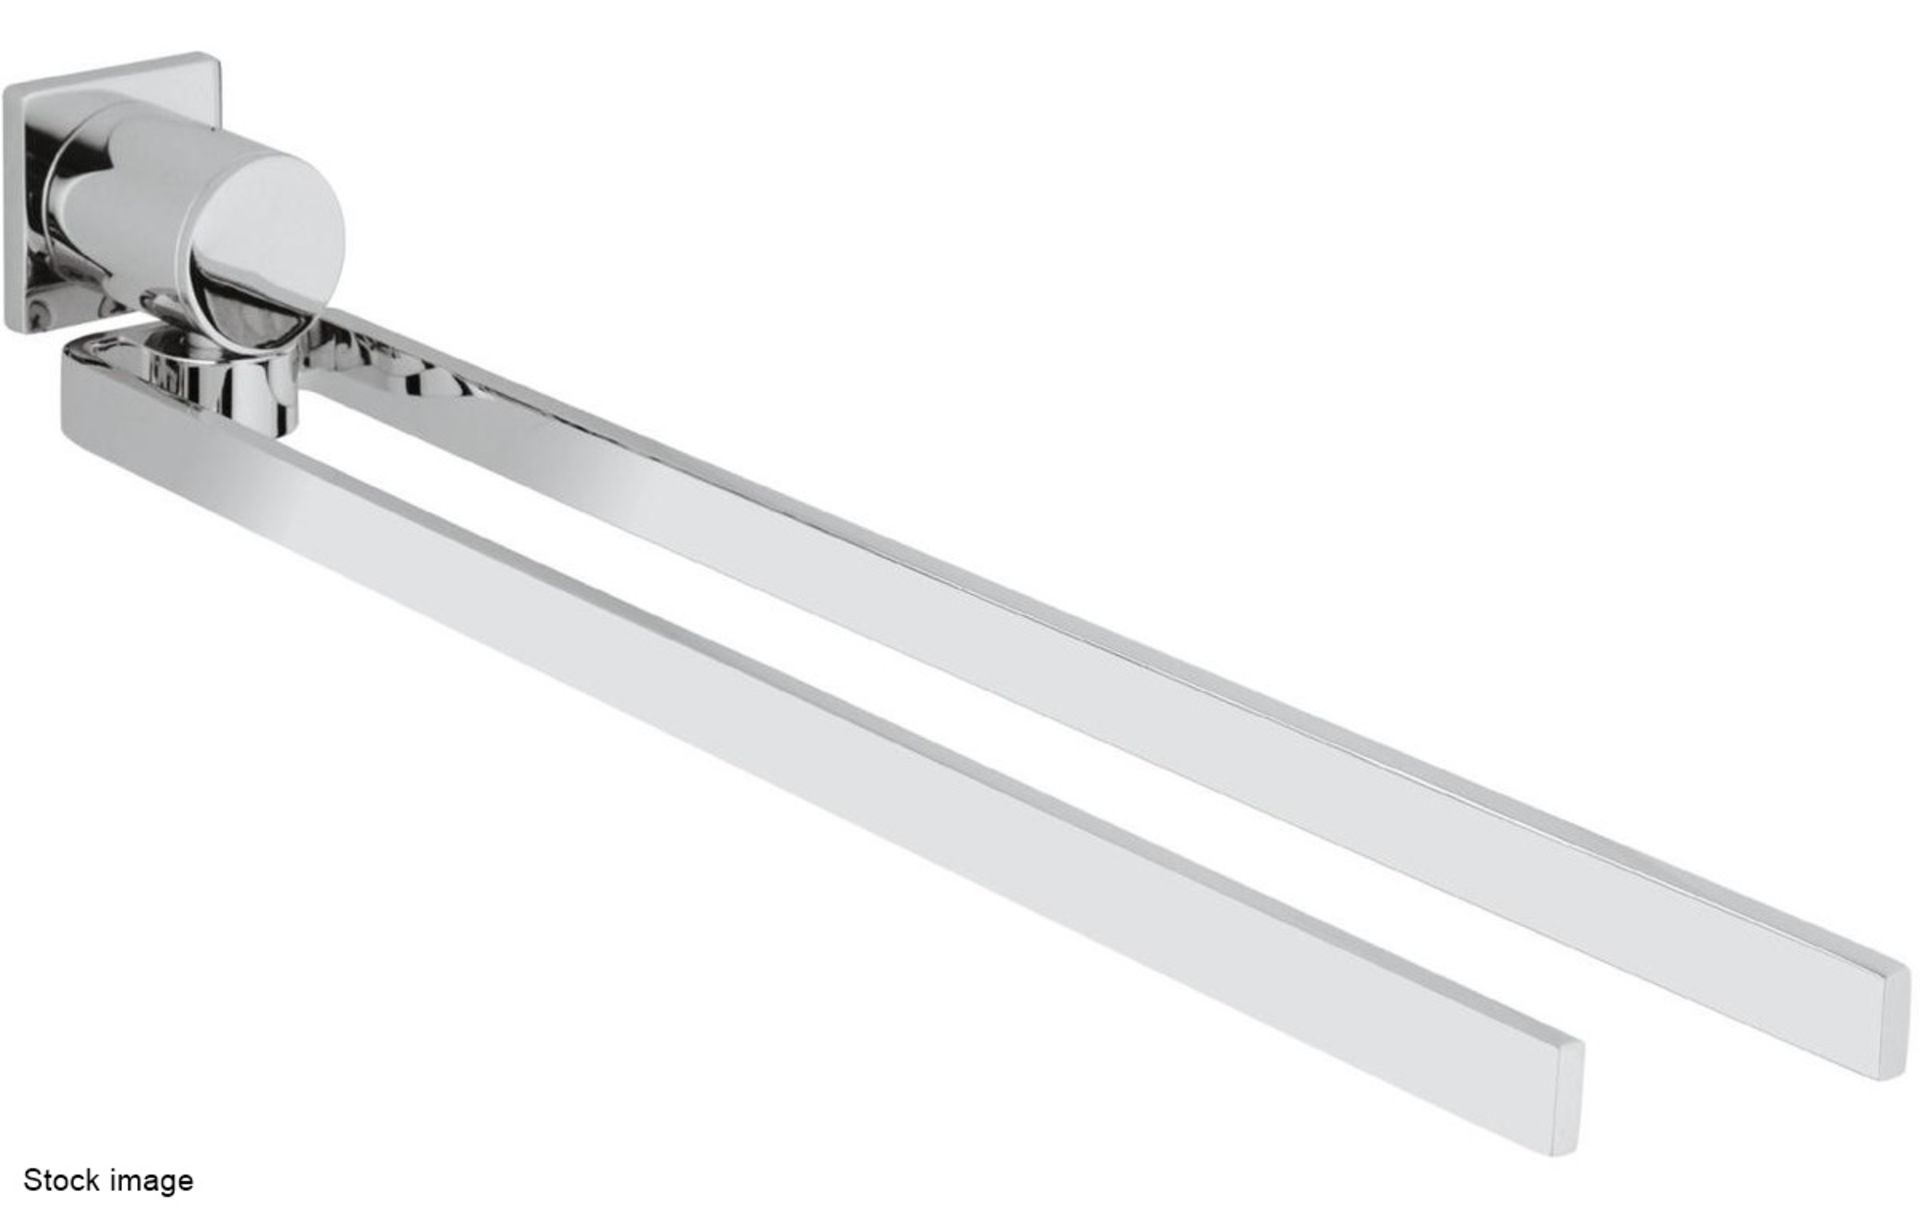 1 x GROHE Allure Double Towel Bar In Chrome - Ref: 40342000 - New & Boxed Stock - RRP £199.00 -